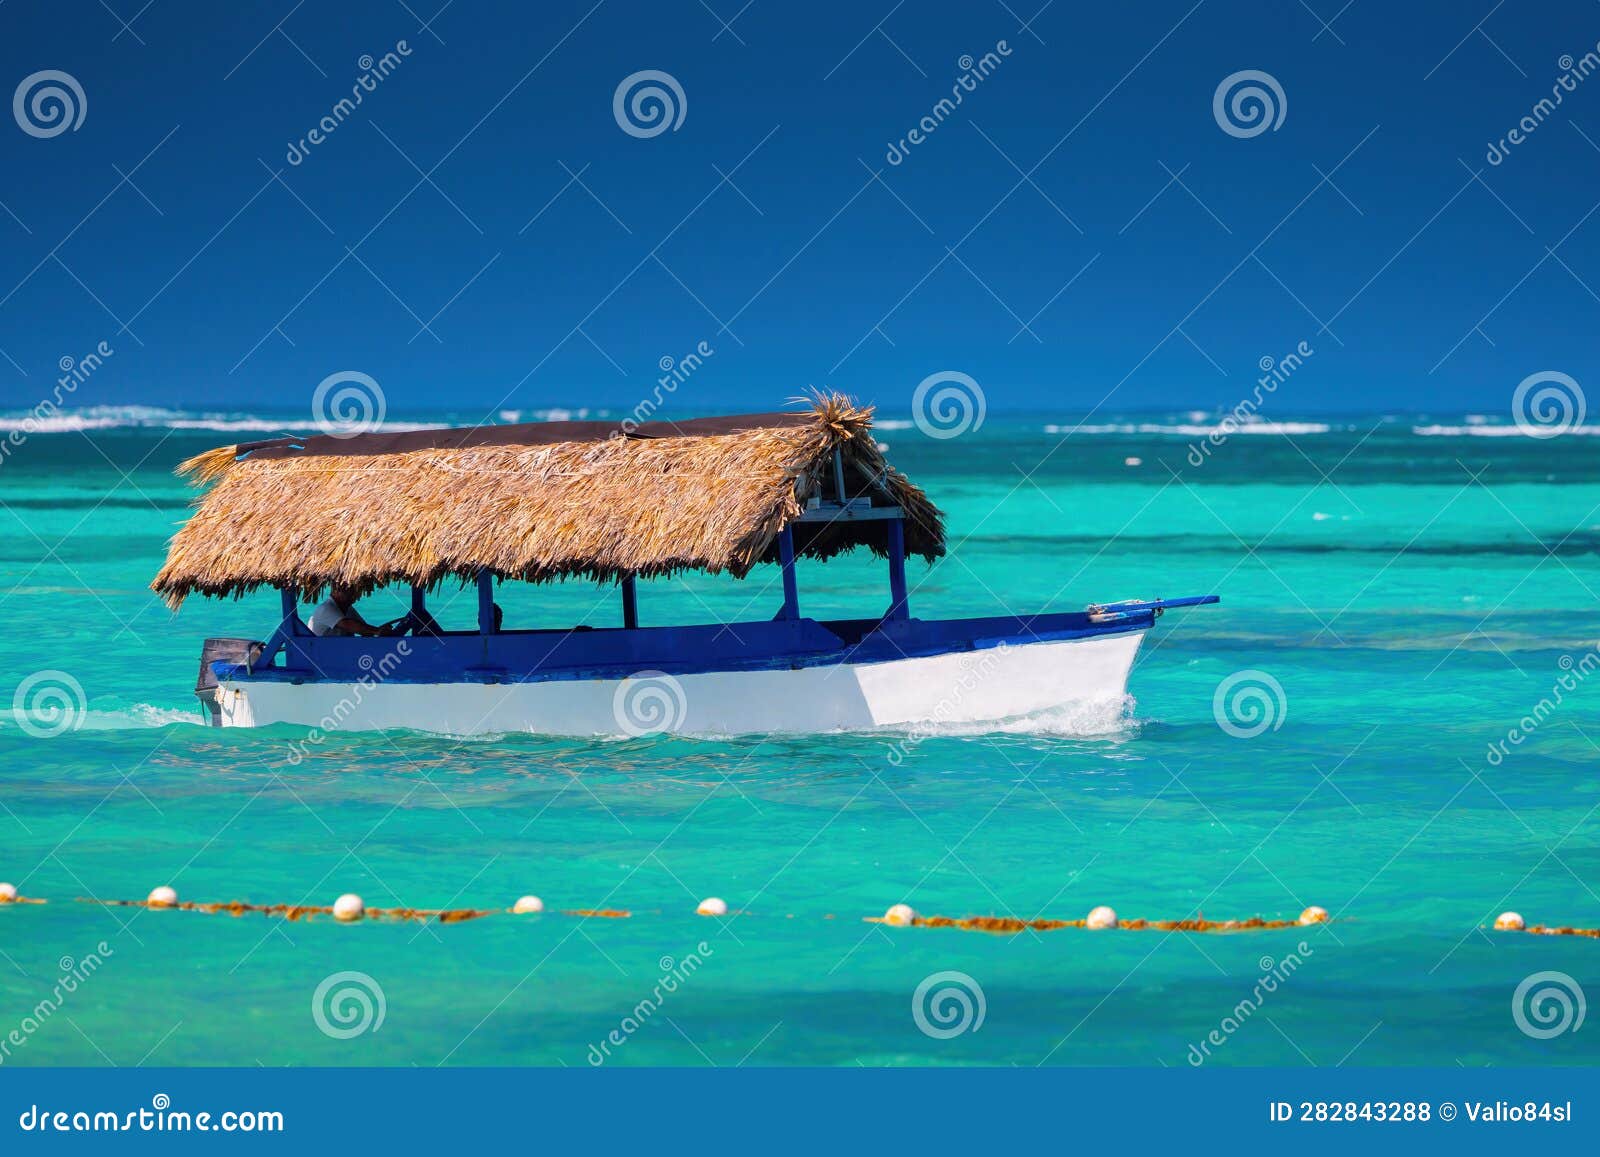 caribbean sea and sailing boat on the water, hot summer day on the caribe. punta cana, dominican republic